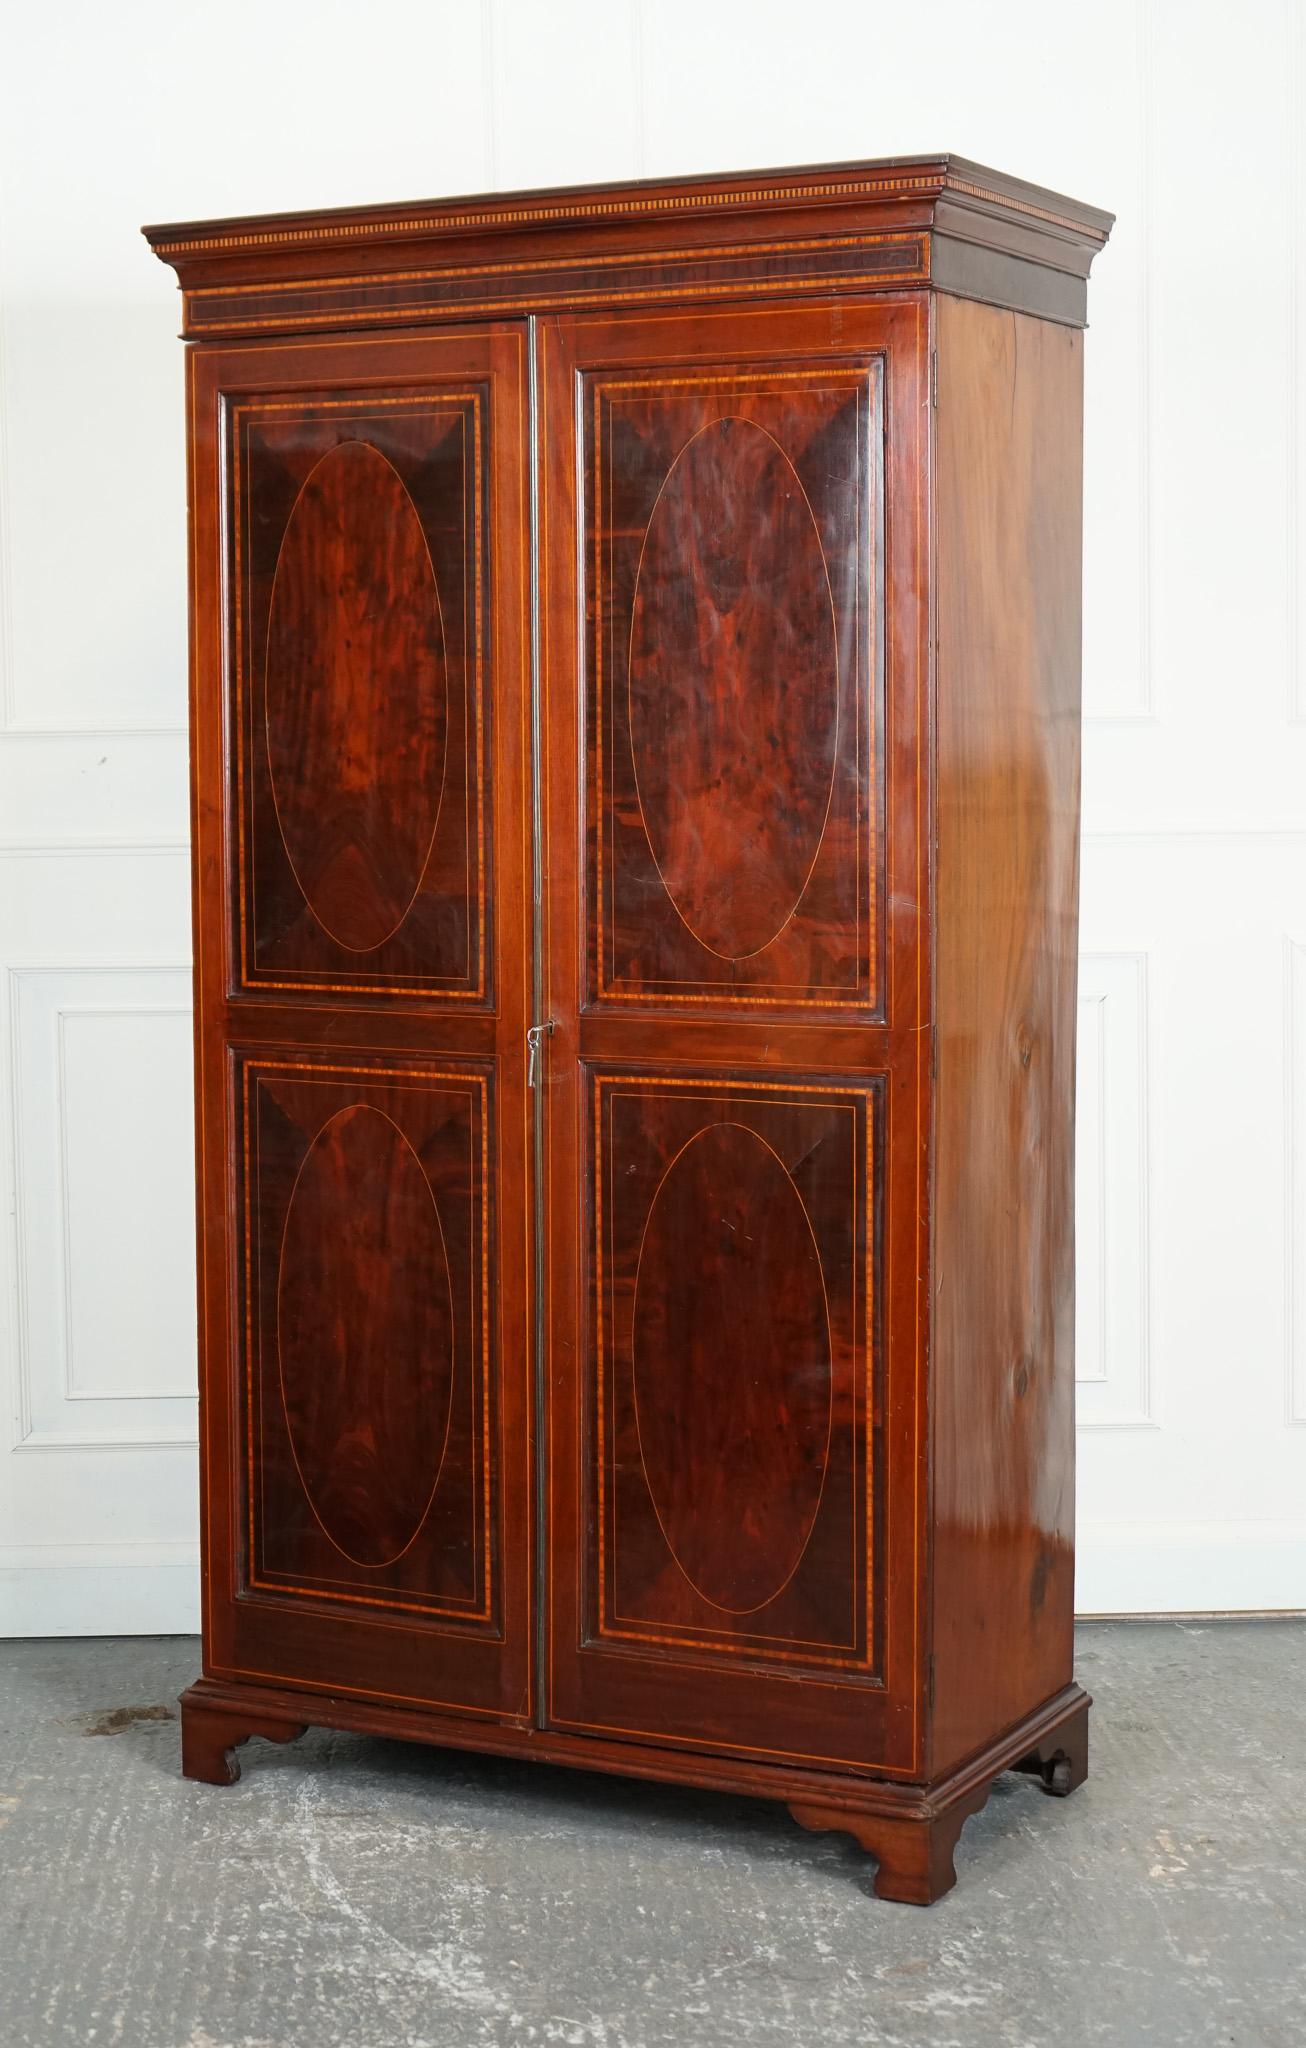 
We are delighted to offer for sale this Edwardian Flamed Hardwood Sheraton Revival Double Wardrobe.

An Edwardian flamed hardwood Sheraton Revival double wardrobe is a luxurious and elegant furniture of the Edwardian era. The use of flamed hardwood